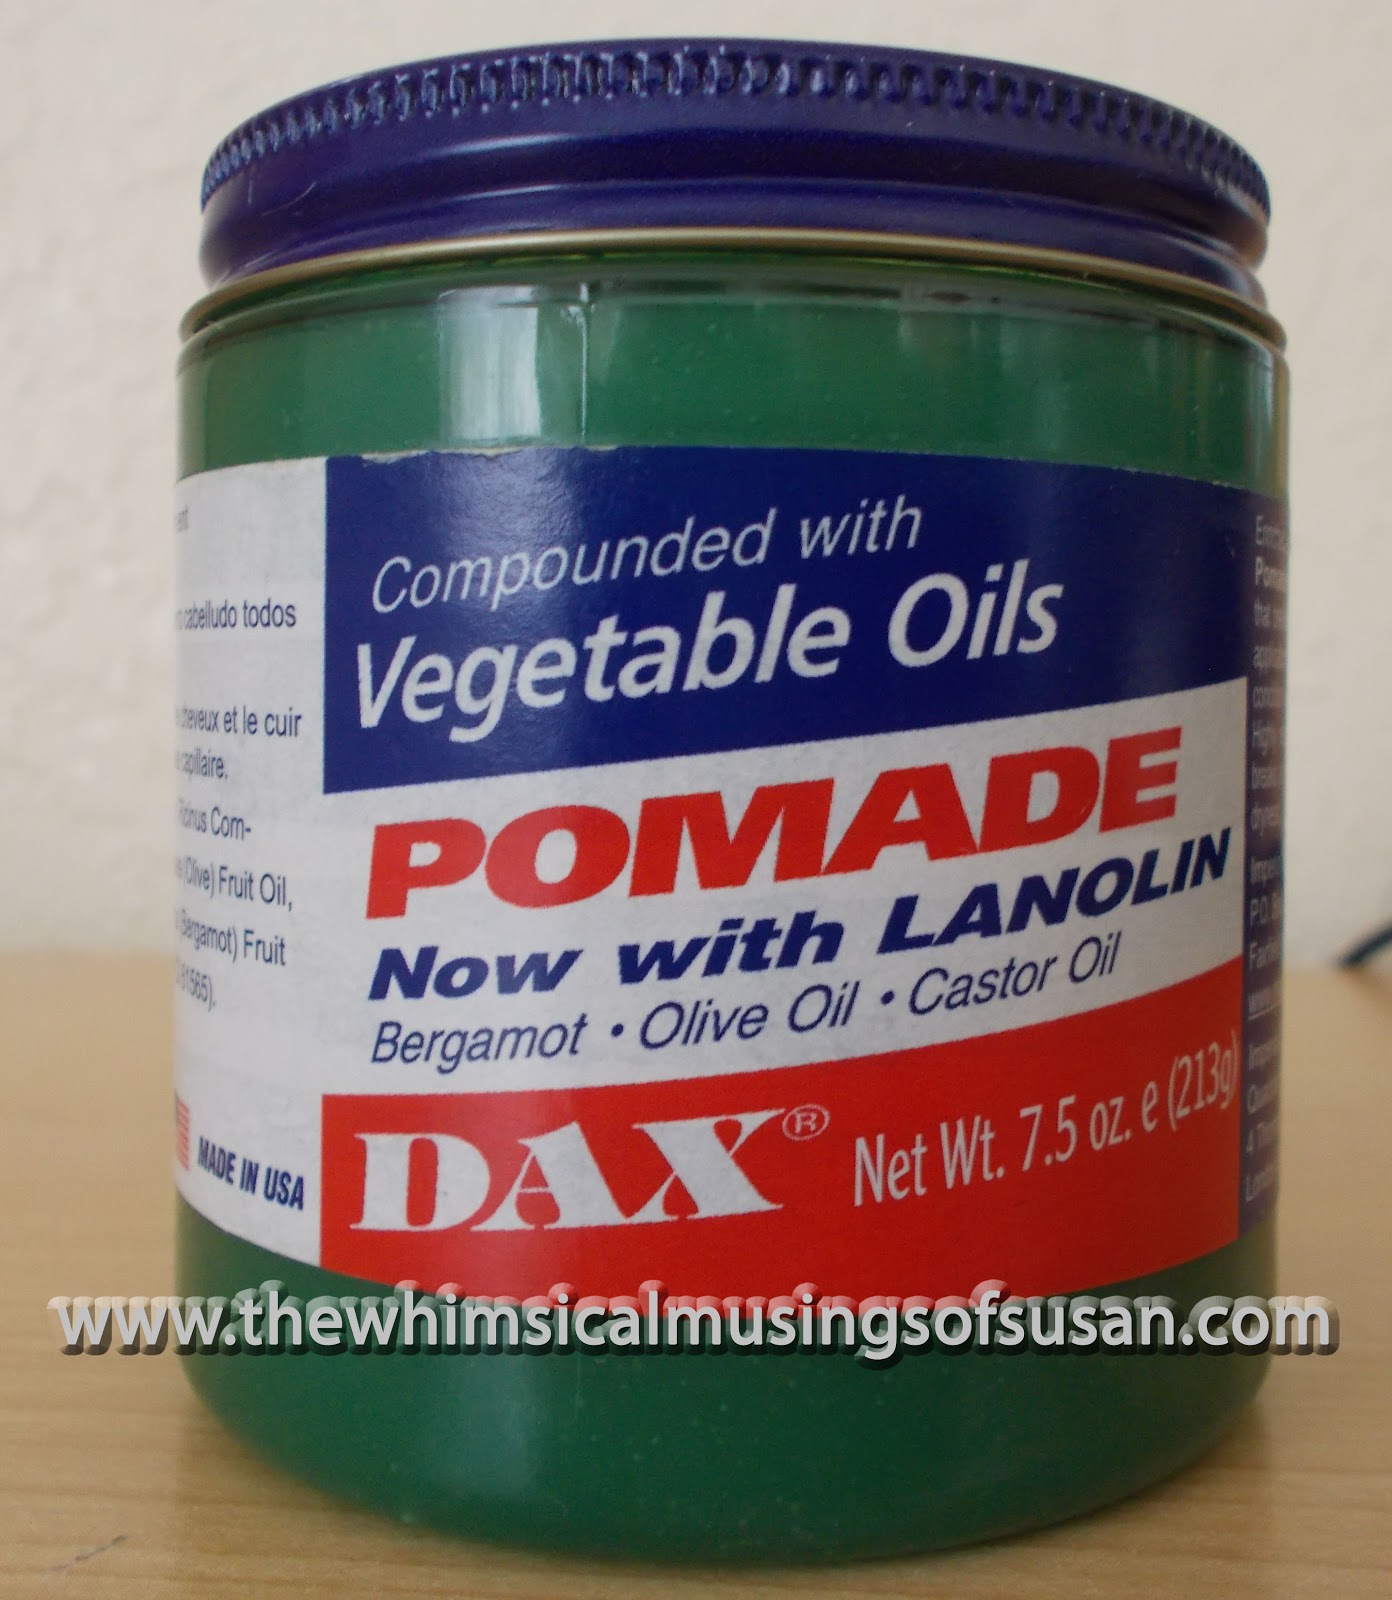 The Whimsical Musings of Susan: Review of Dax Pomade